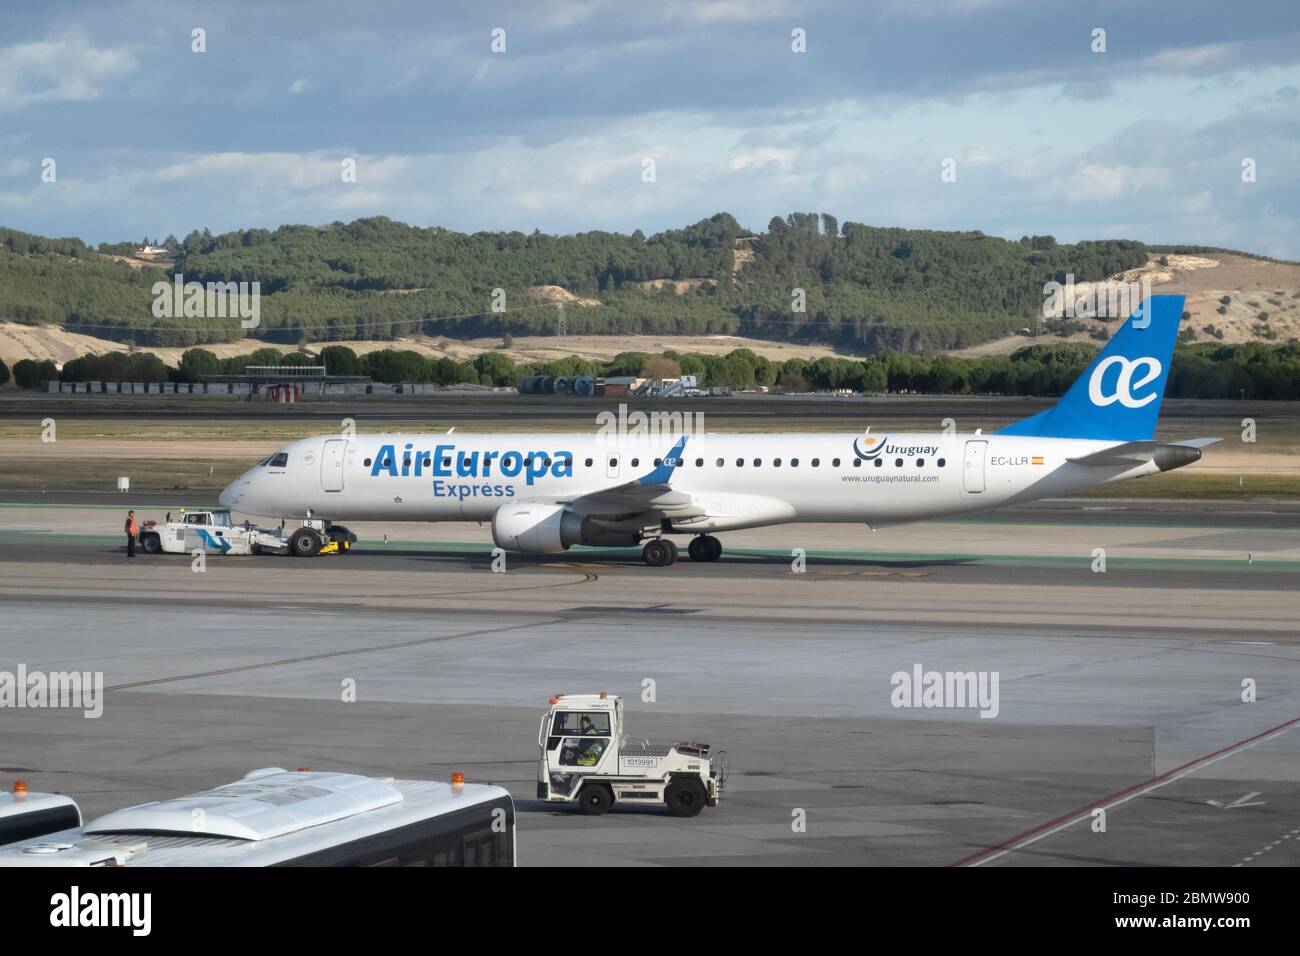 MADRID, SPAIN - May, 2020: Air Europa express plain at Madrid - Barajas Airport. Commercial plane landing or taking off from the airport after Stock Photo